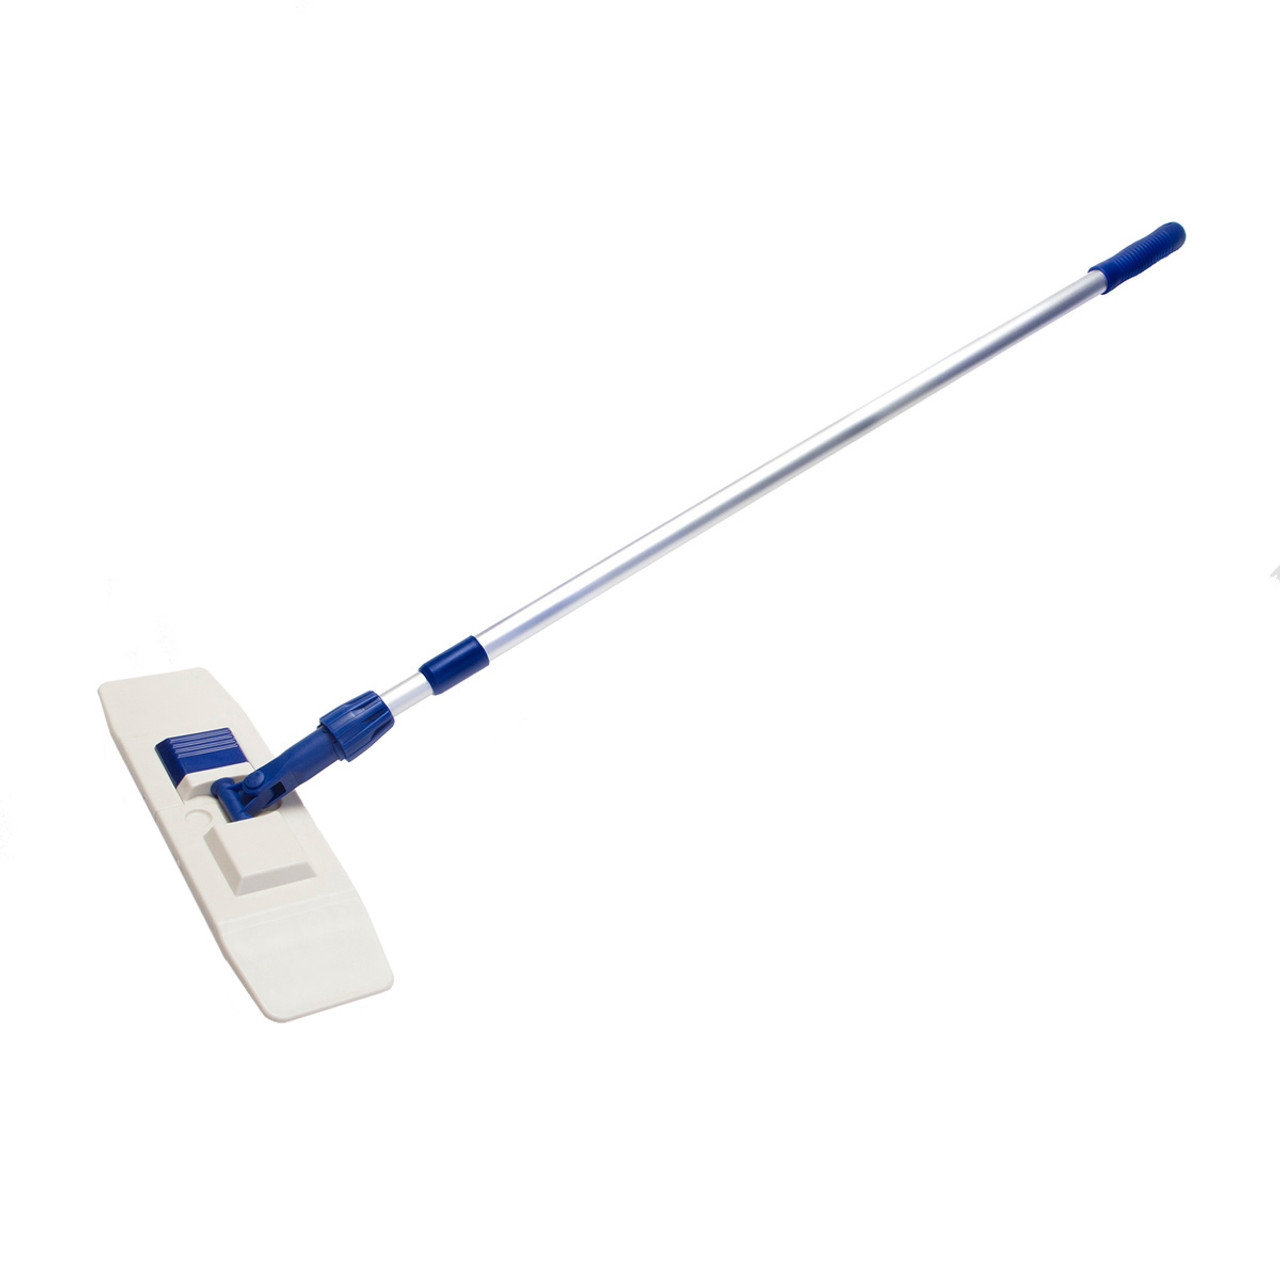 Wholesale Microfiber Pocket Mop 18 Inch Frame with Pole